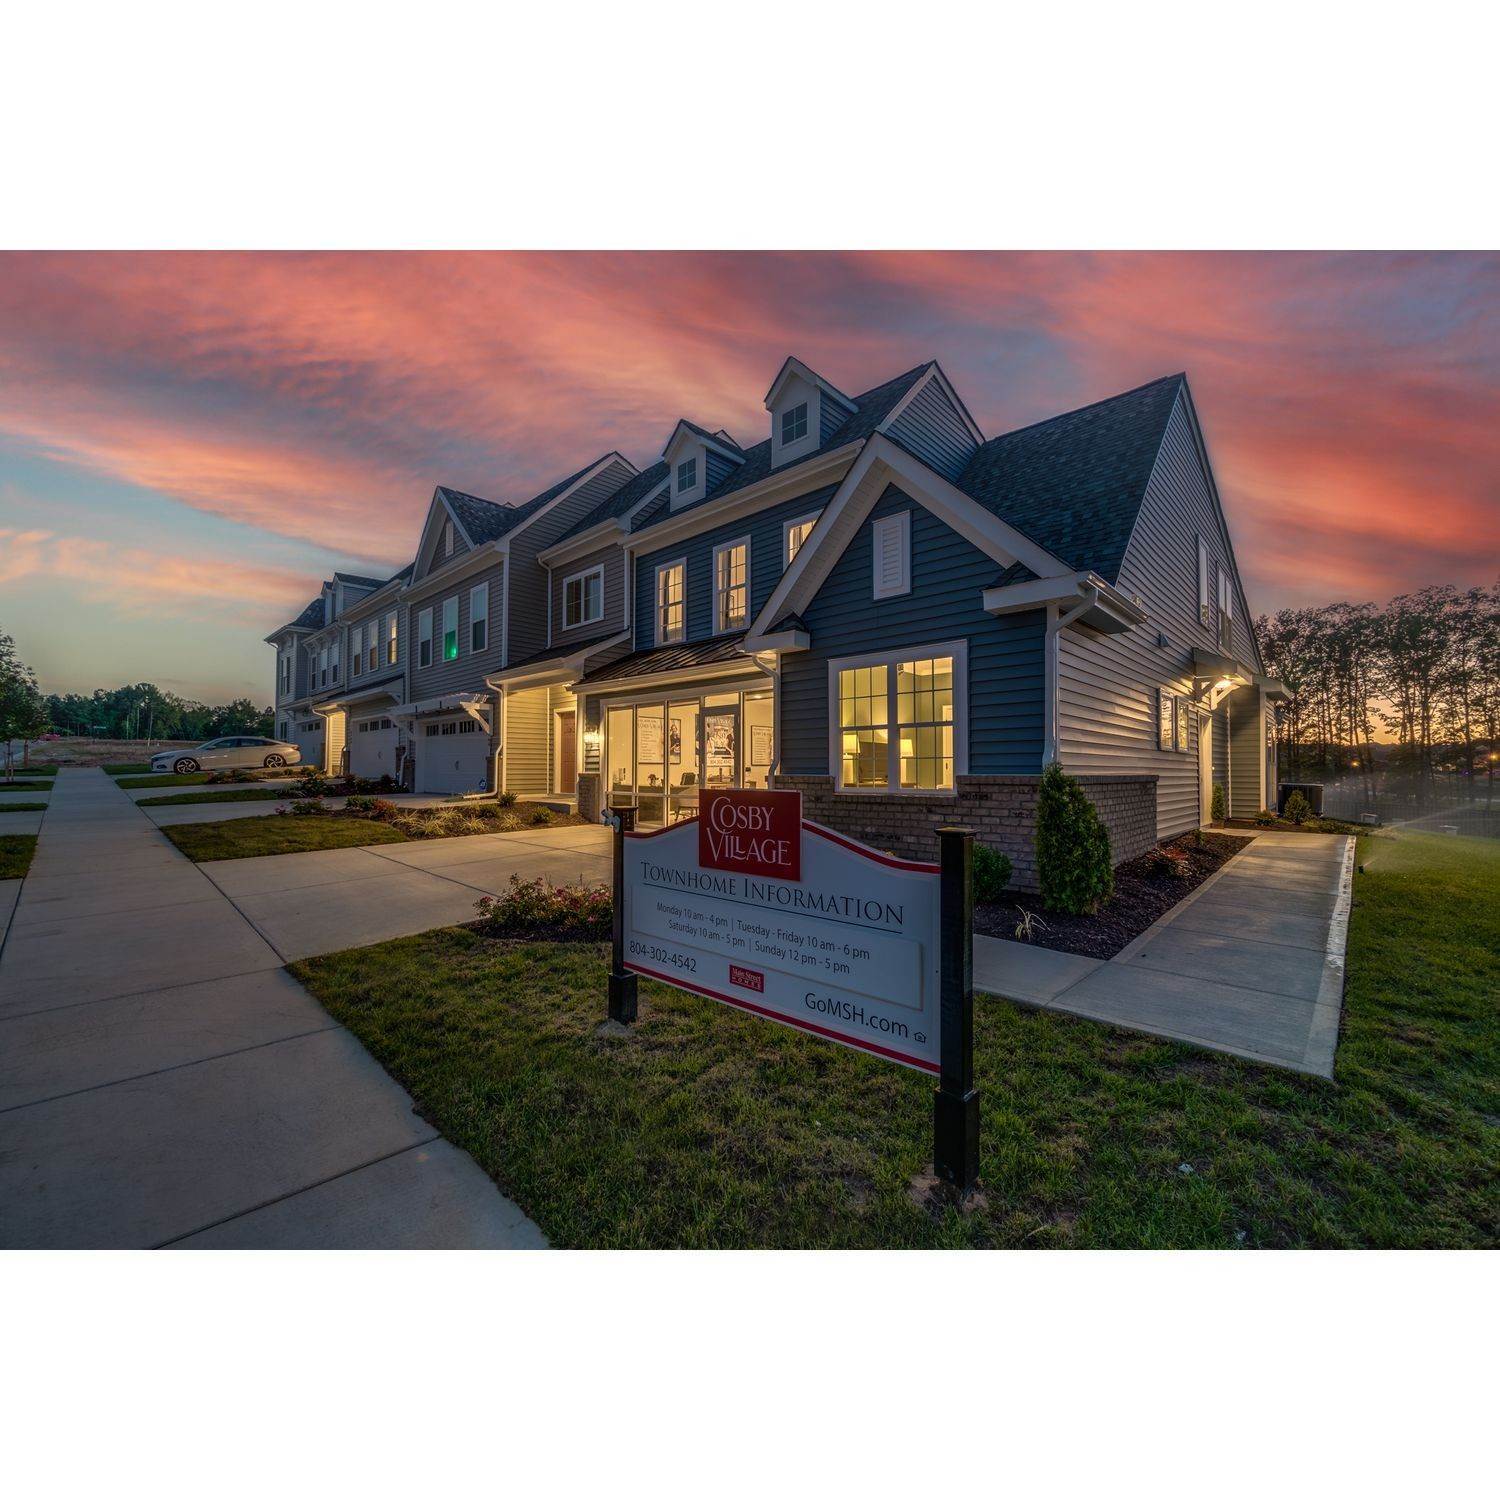 10. Cosby Village 2-Story Townhomes building at 15220 Dunton Avenue, Chesterfield, VA 23832